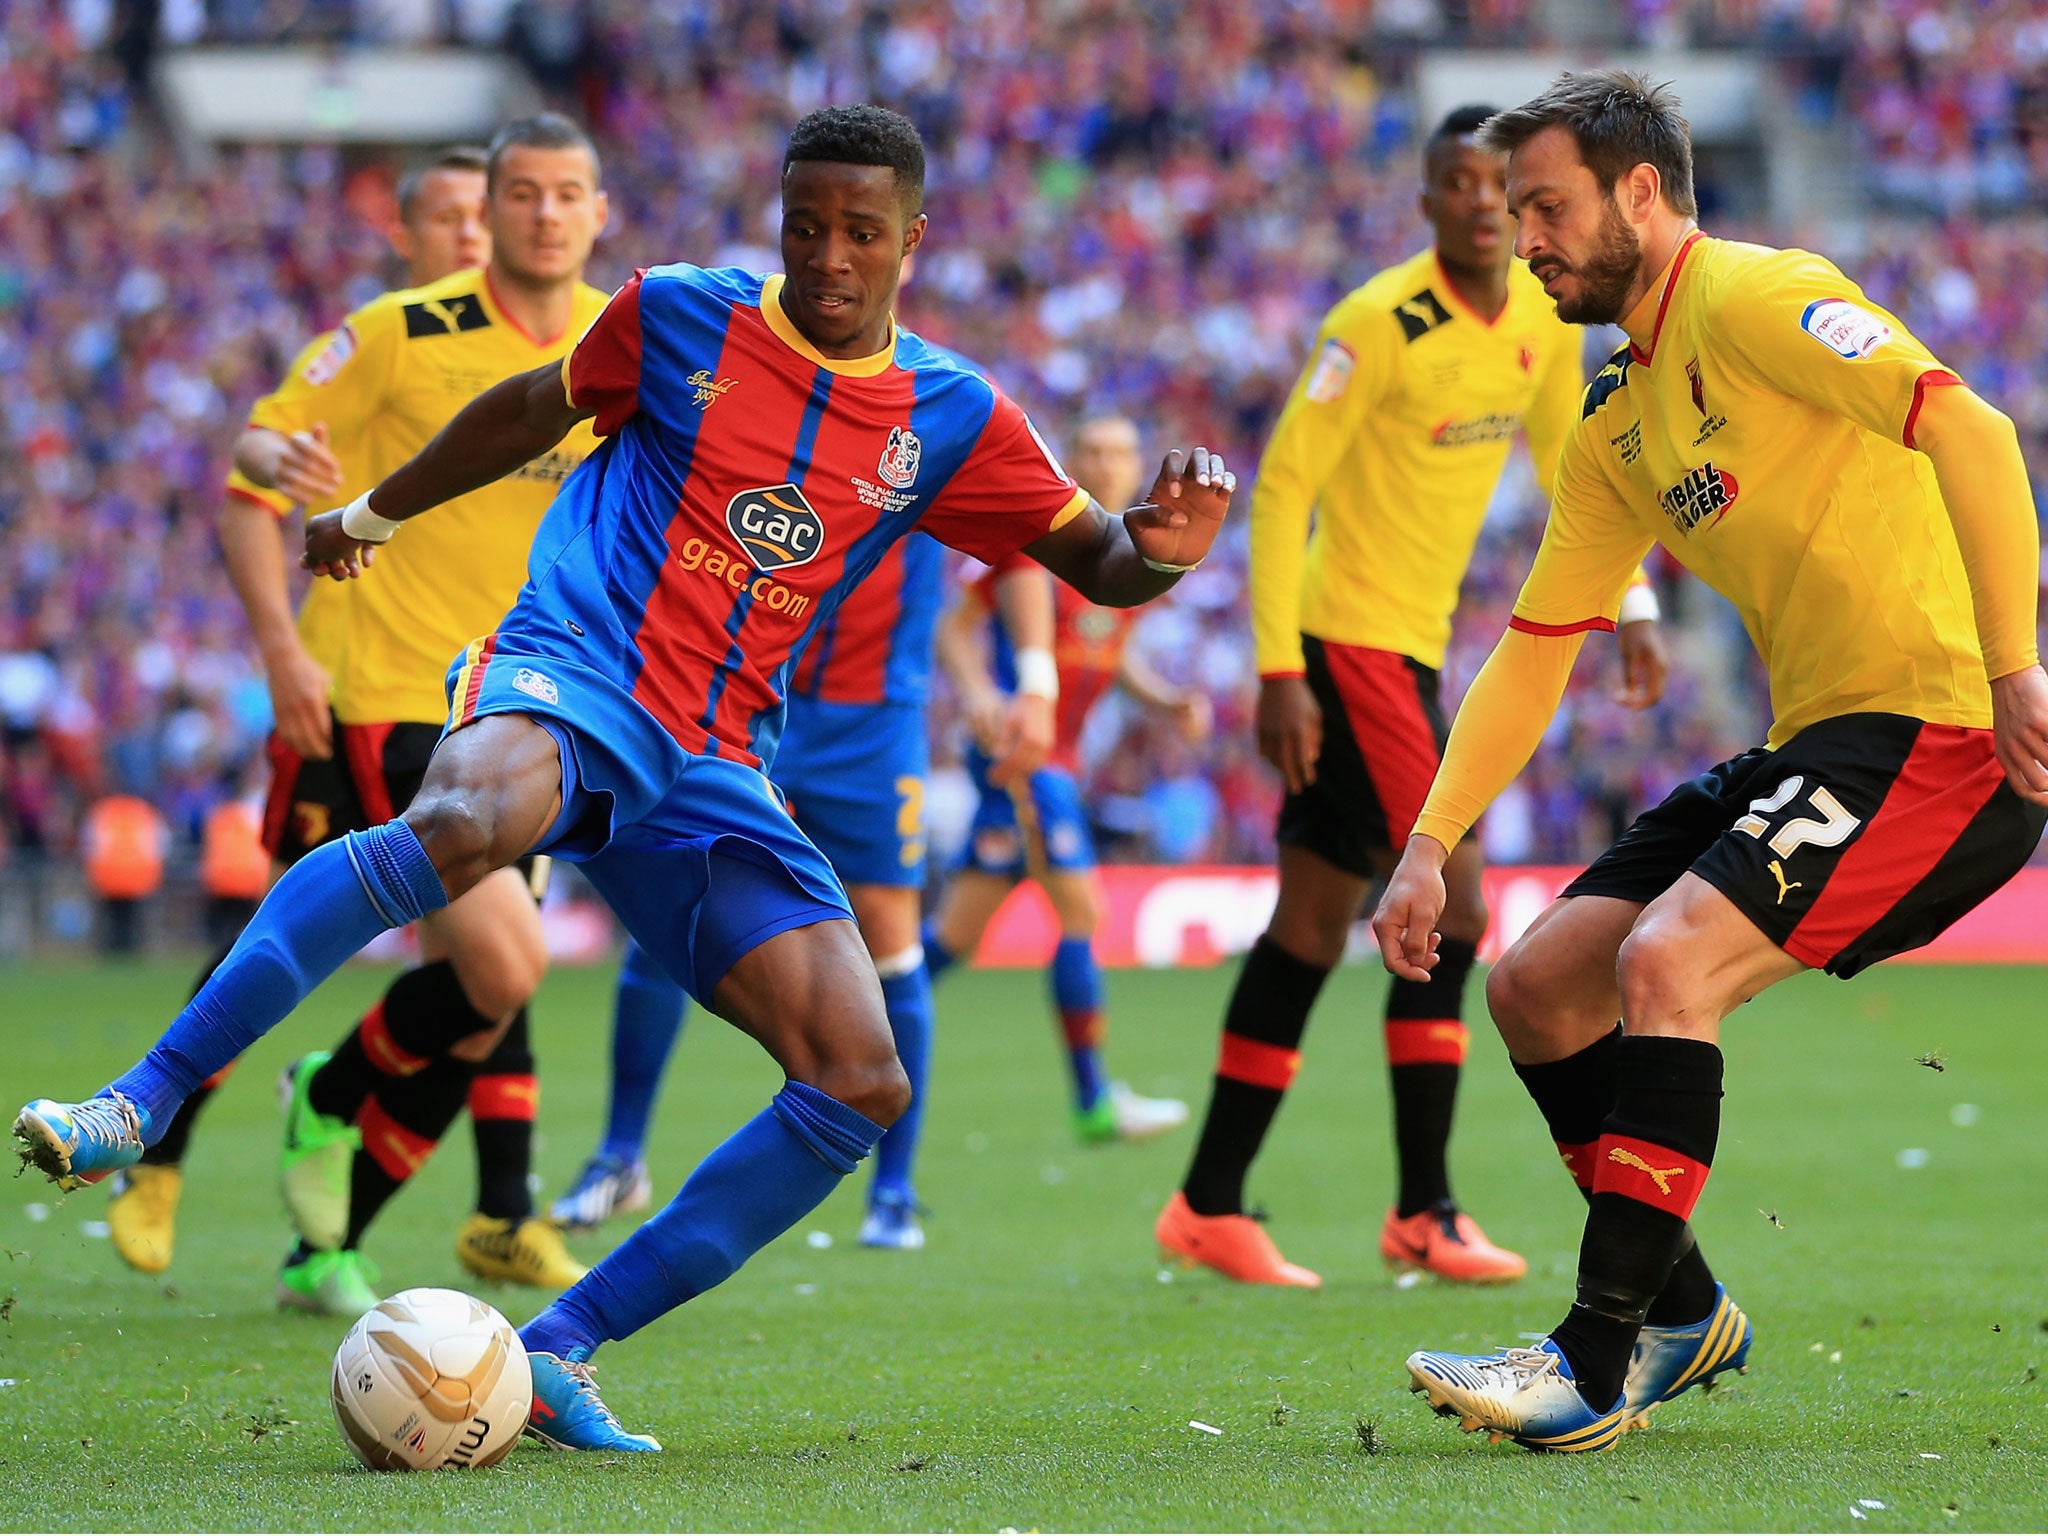 Wilfried Zaha, left, takes on Marco Cassetti, right